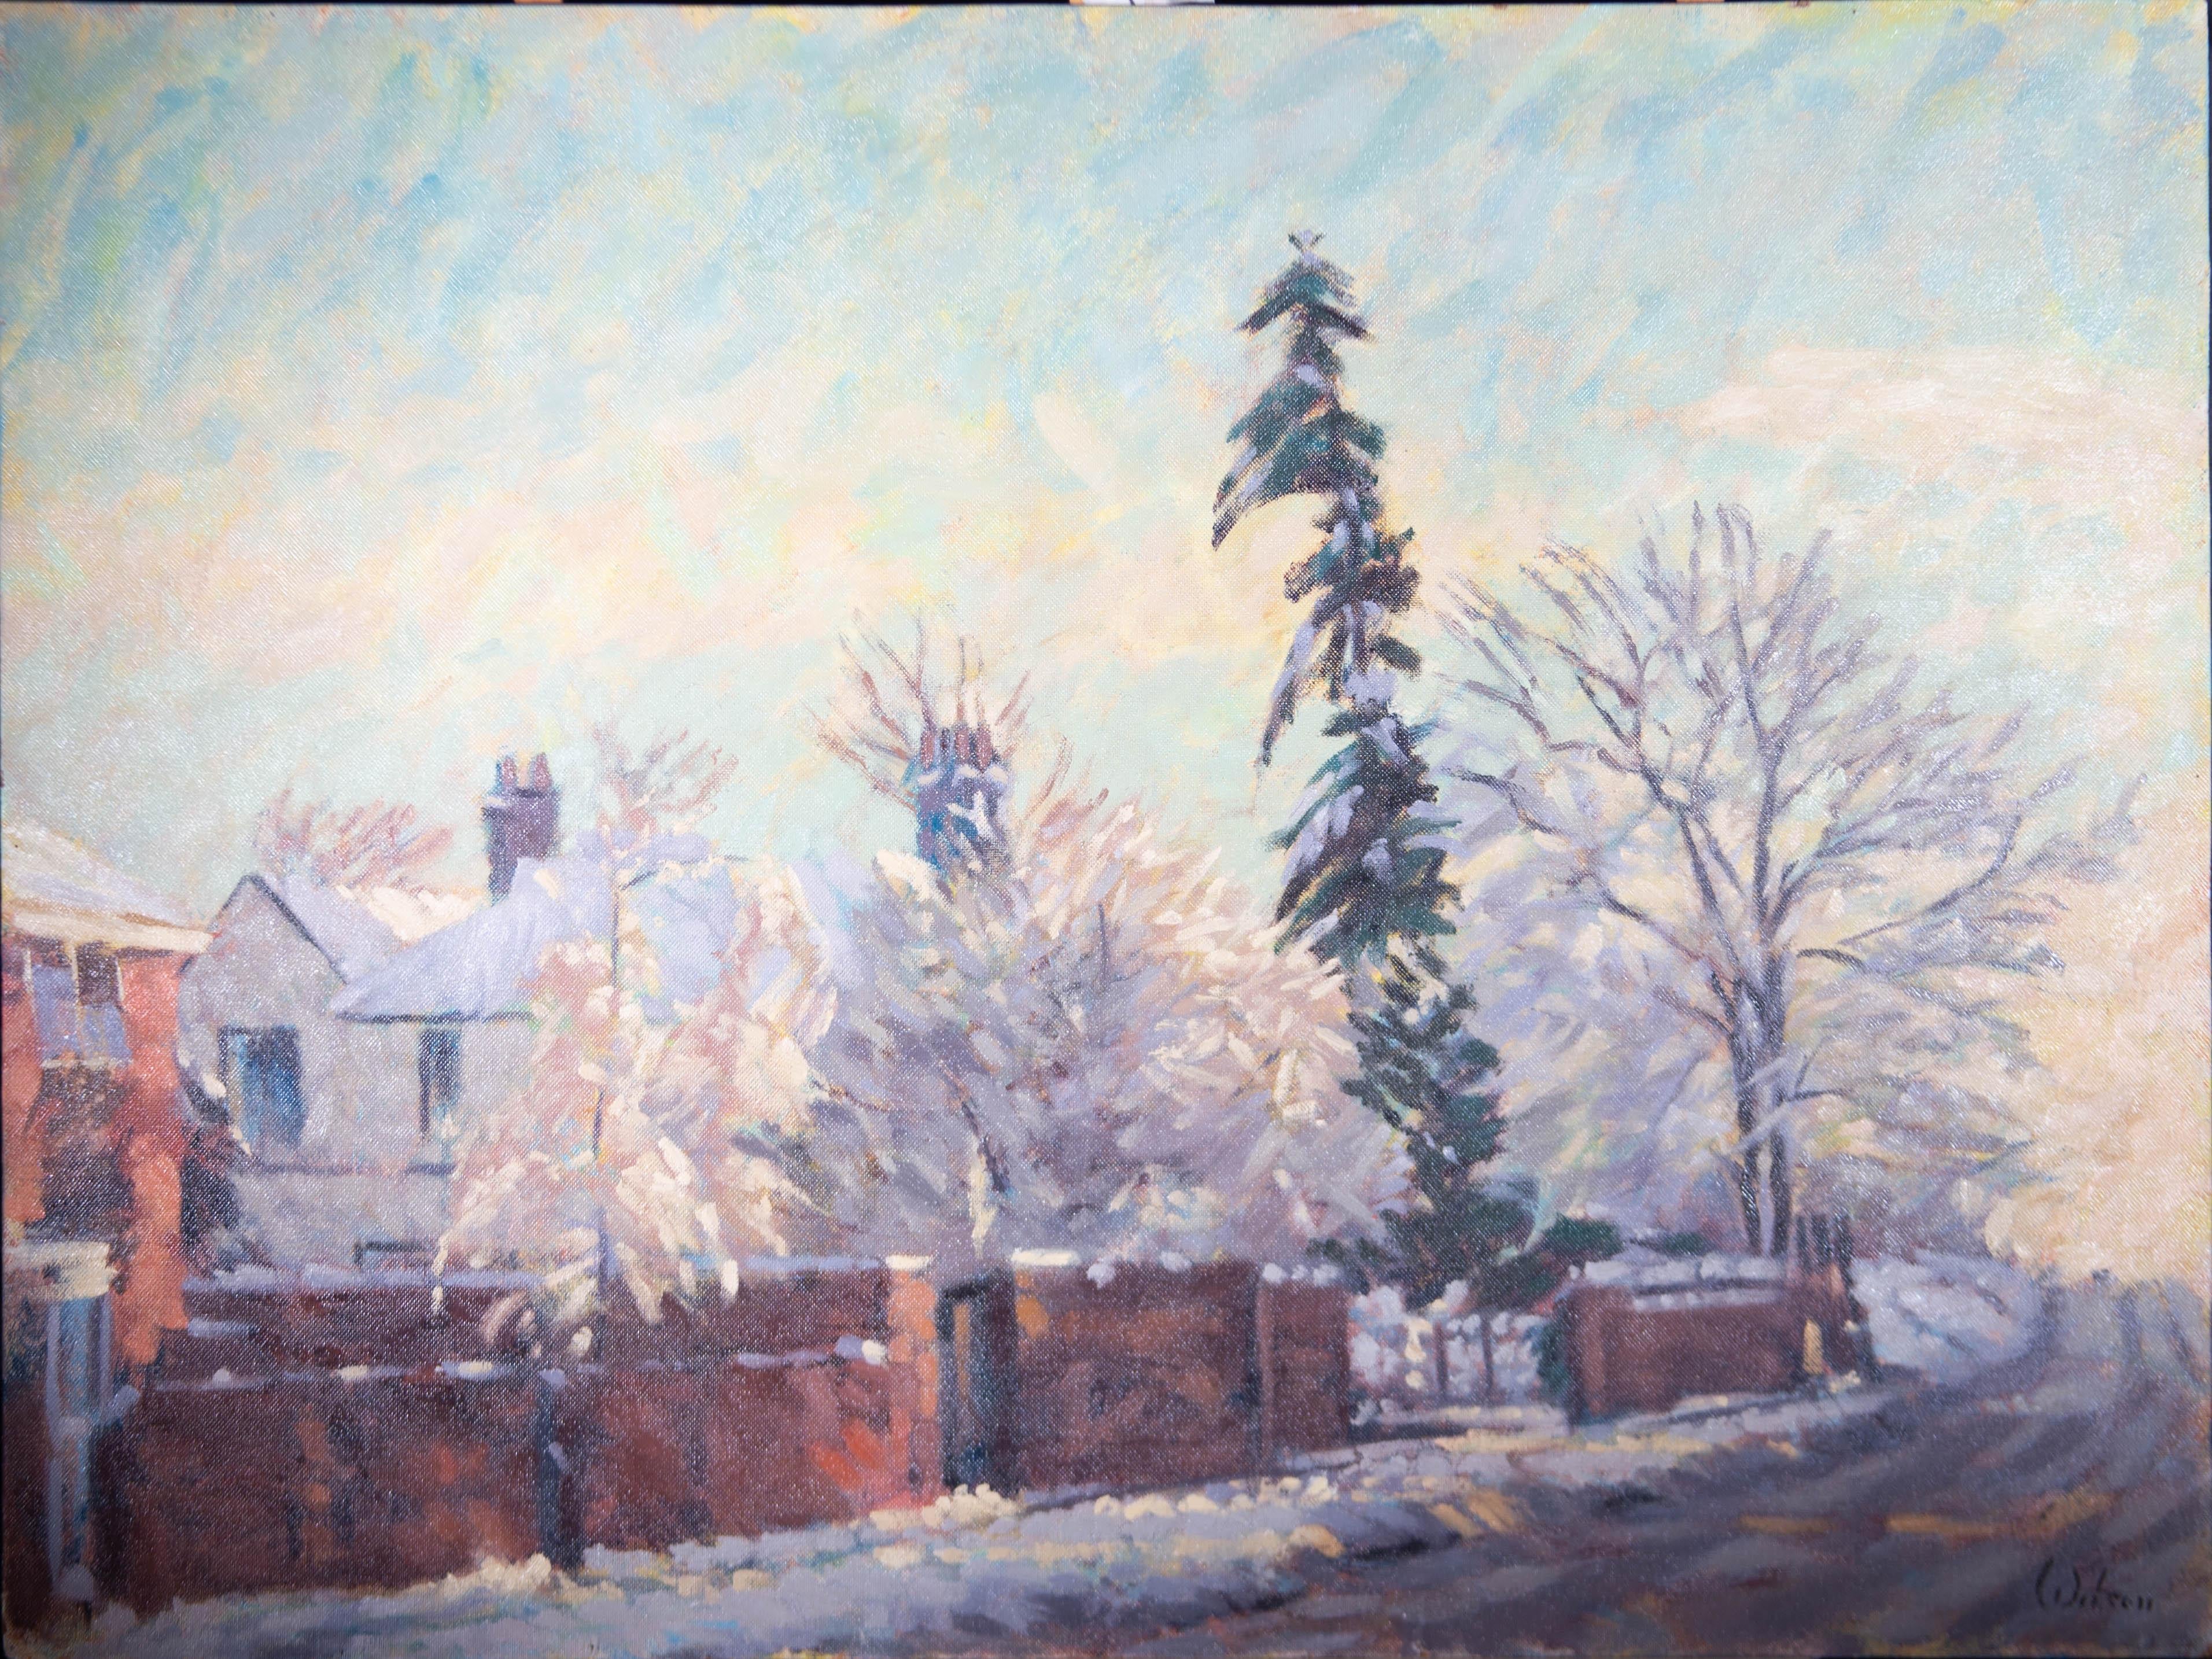 A pretty, Winter's scene showing a view of Watling Street, St Albans, in the snow. The artist has wonderfully captured the yellow light of a snowy late afternoon in England's winter.

The artist has signed to the lower right corner and the painting